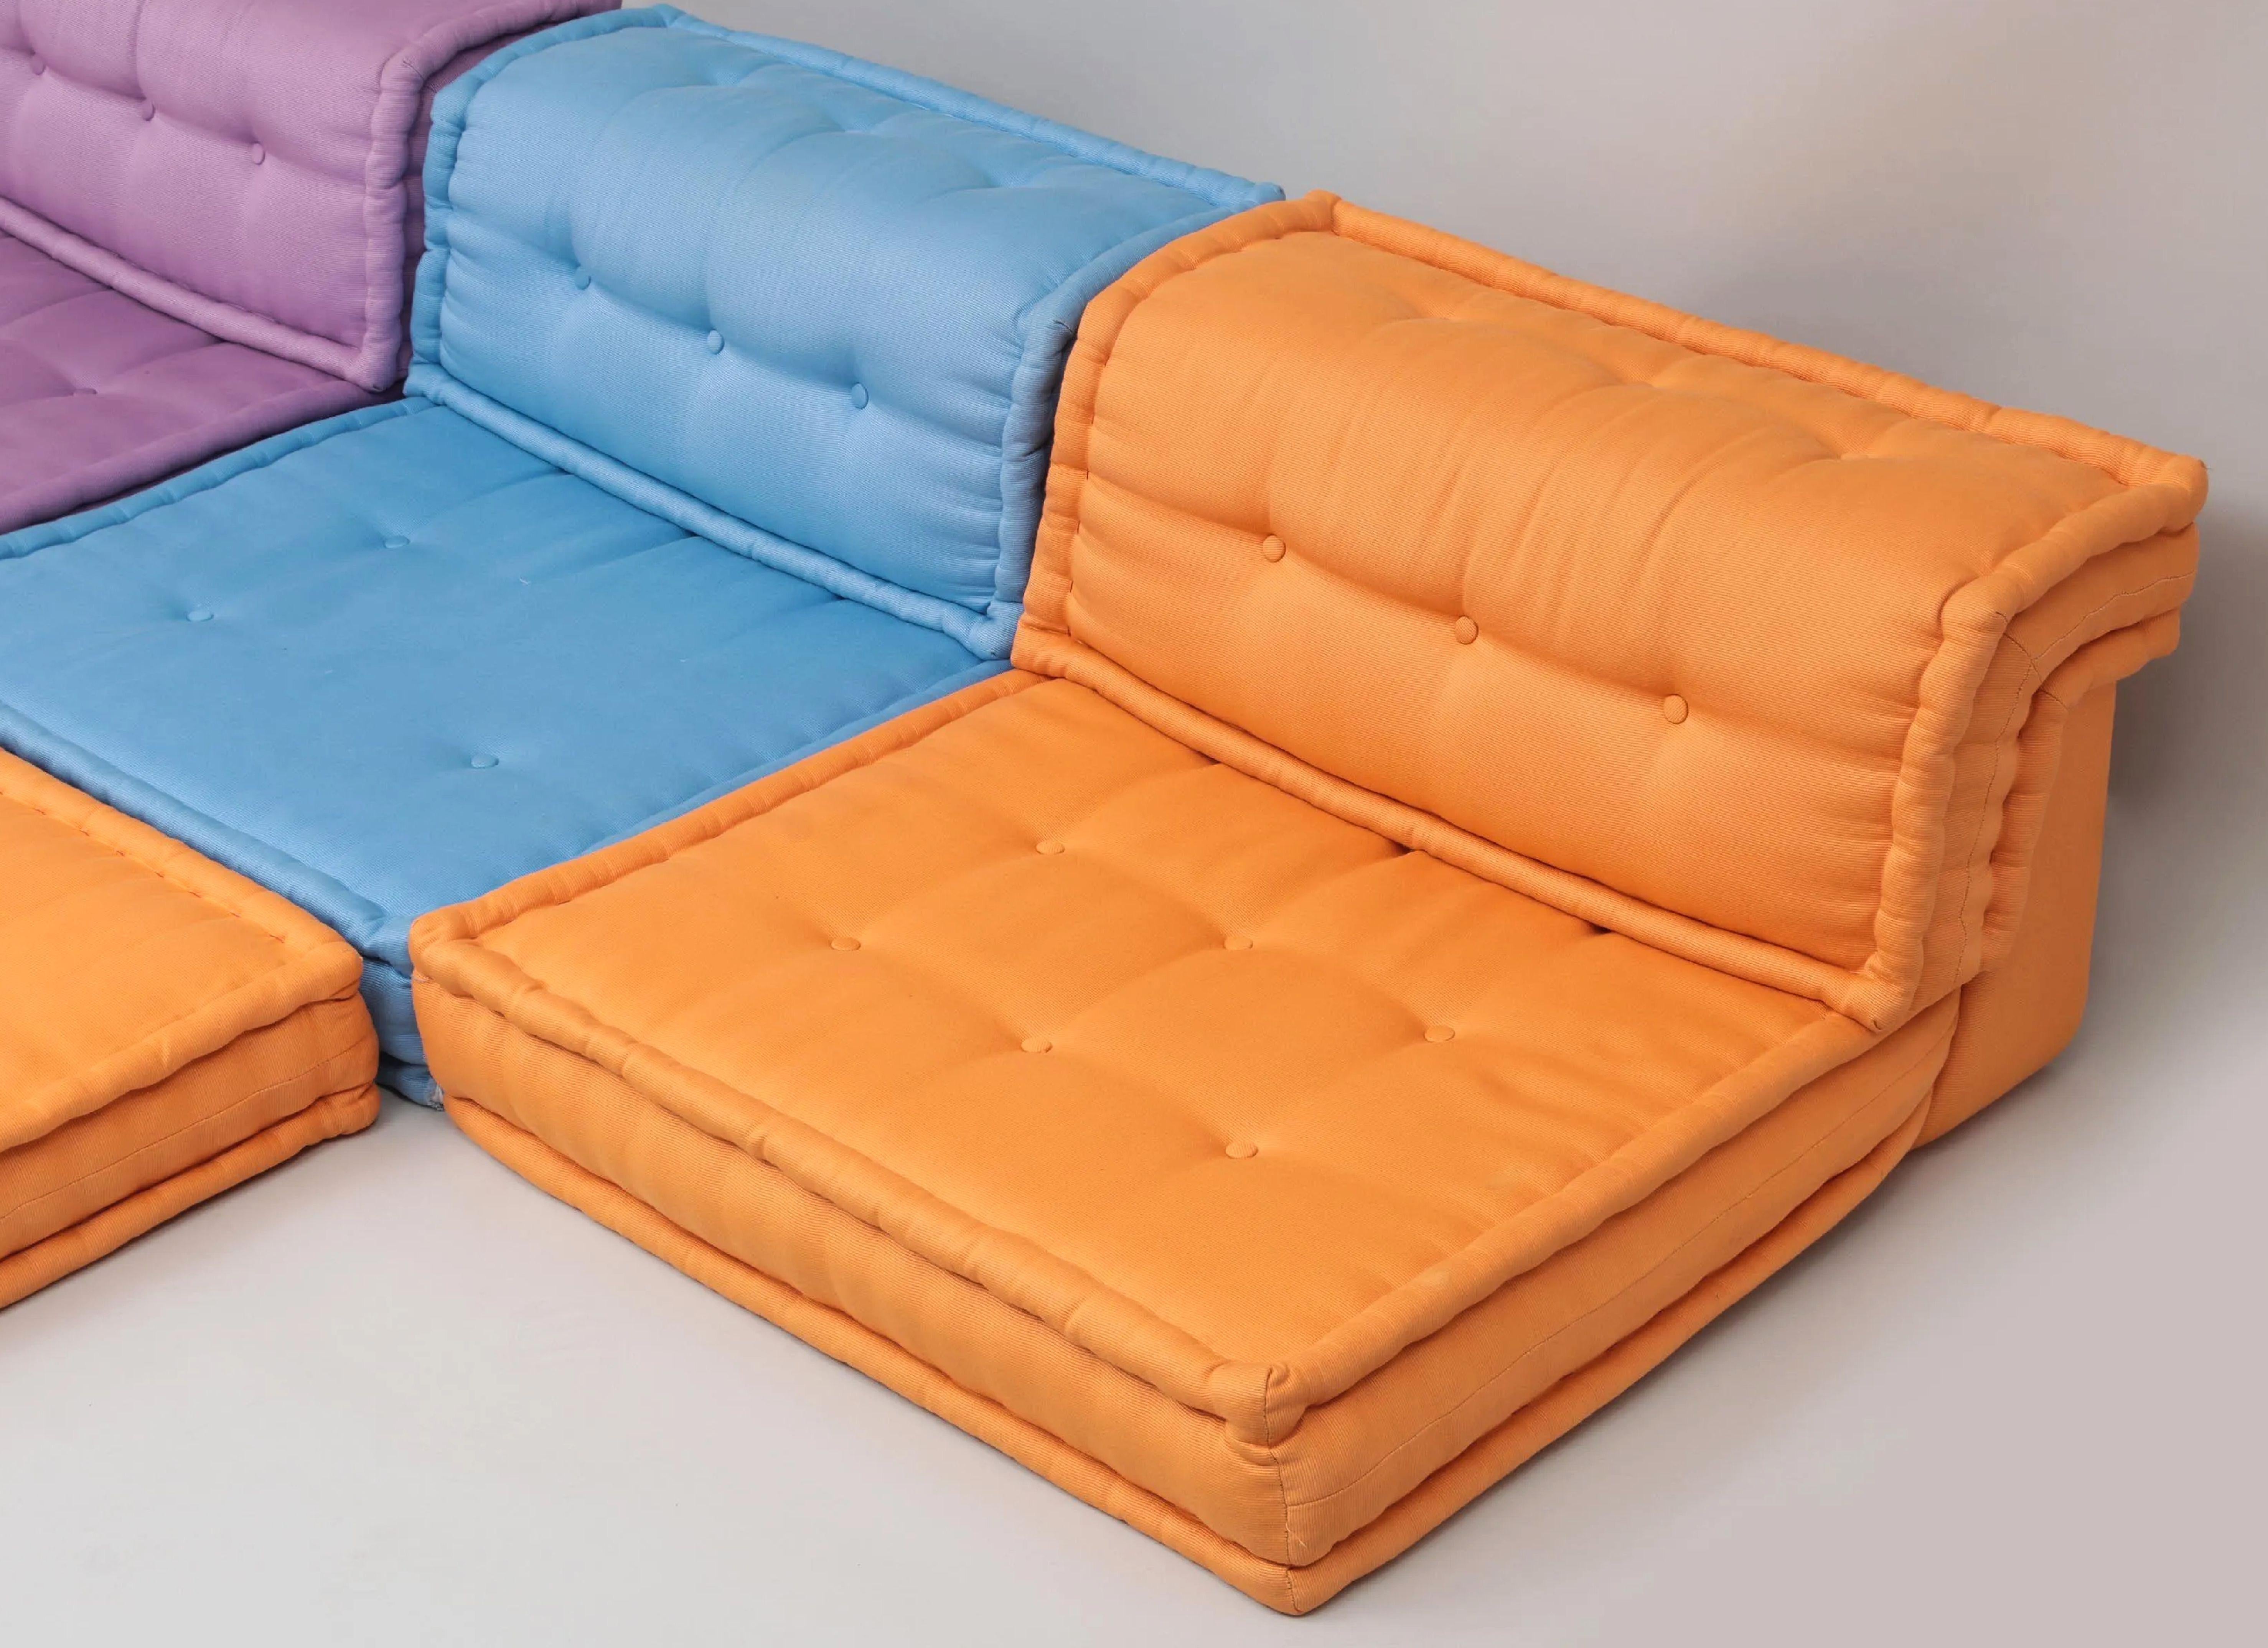 Mah-Jong modular sofa set by Hans Hopfer, designed in 1971 for Roche Bobois and a textile from the house of Missoni. This listing is for a set of elements as follows: 7 square cushions (1 Persian pink, 1 tea green, 2 orange, 1 lavender, 1